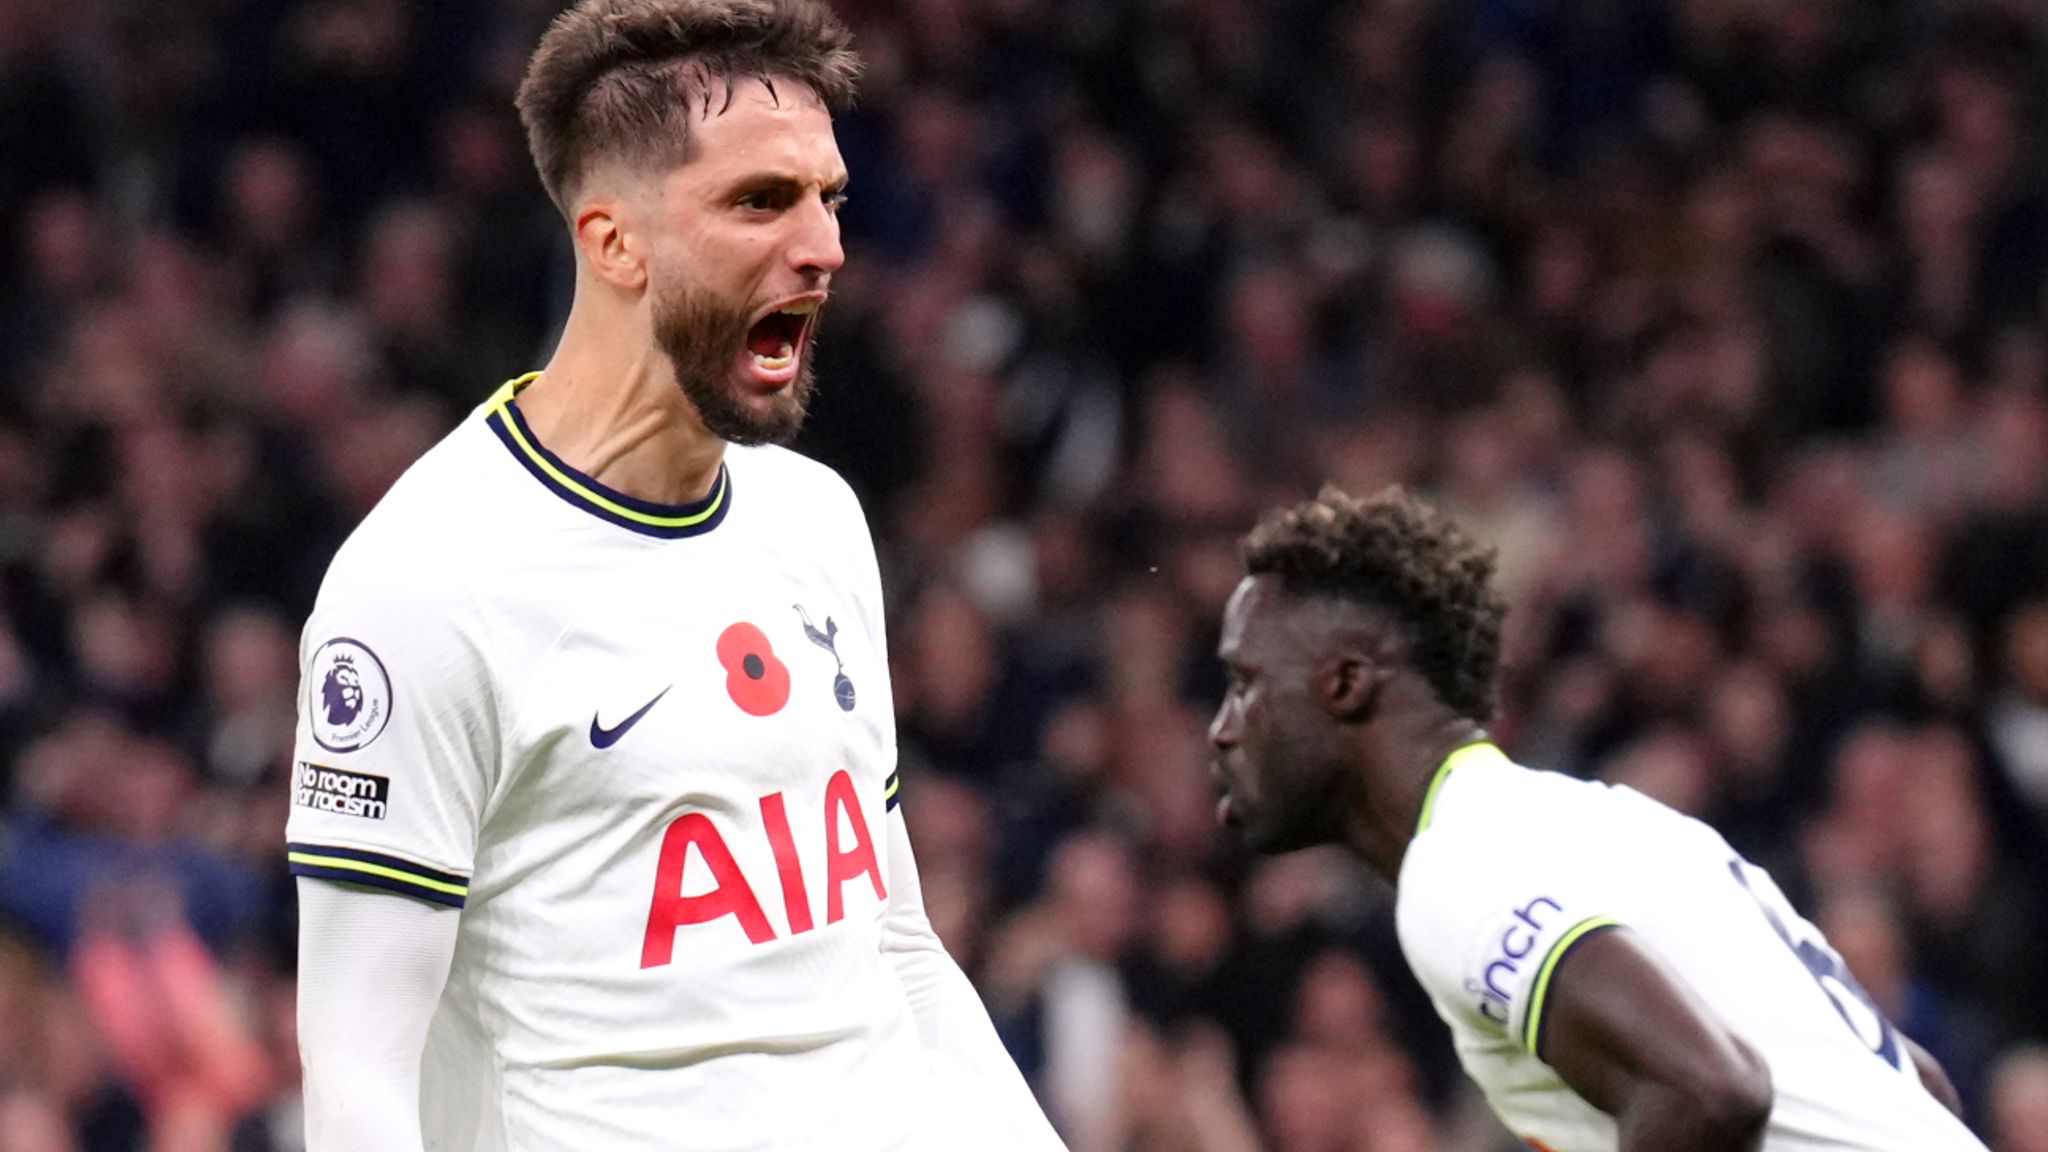 Inter 4-3 Tottenham: What Just Happened and What Does It Mean